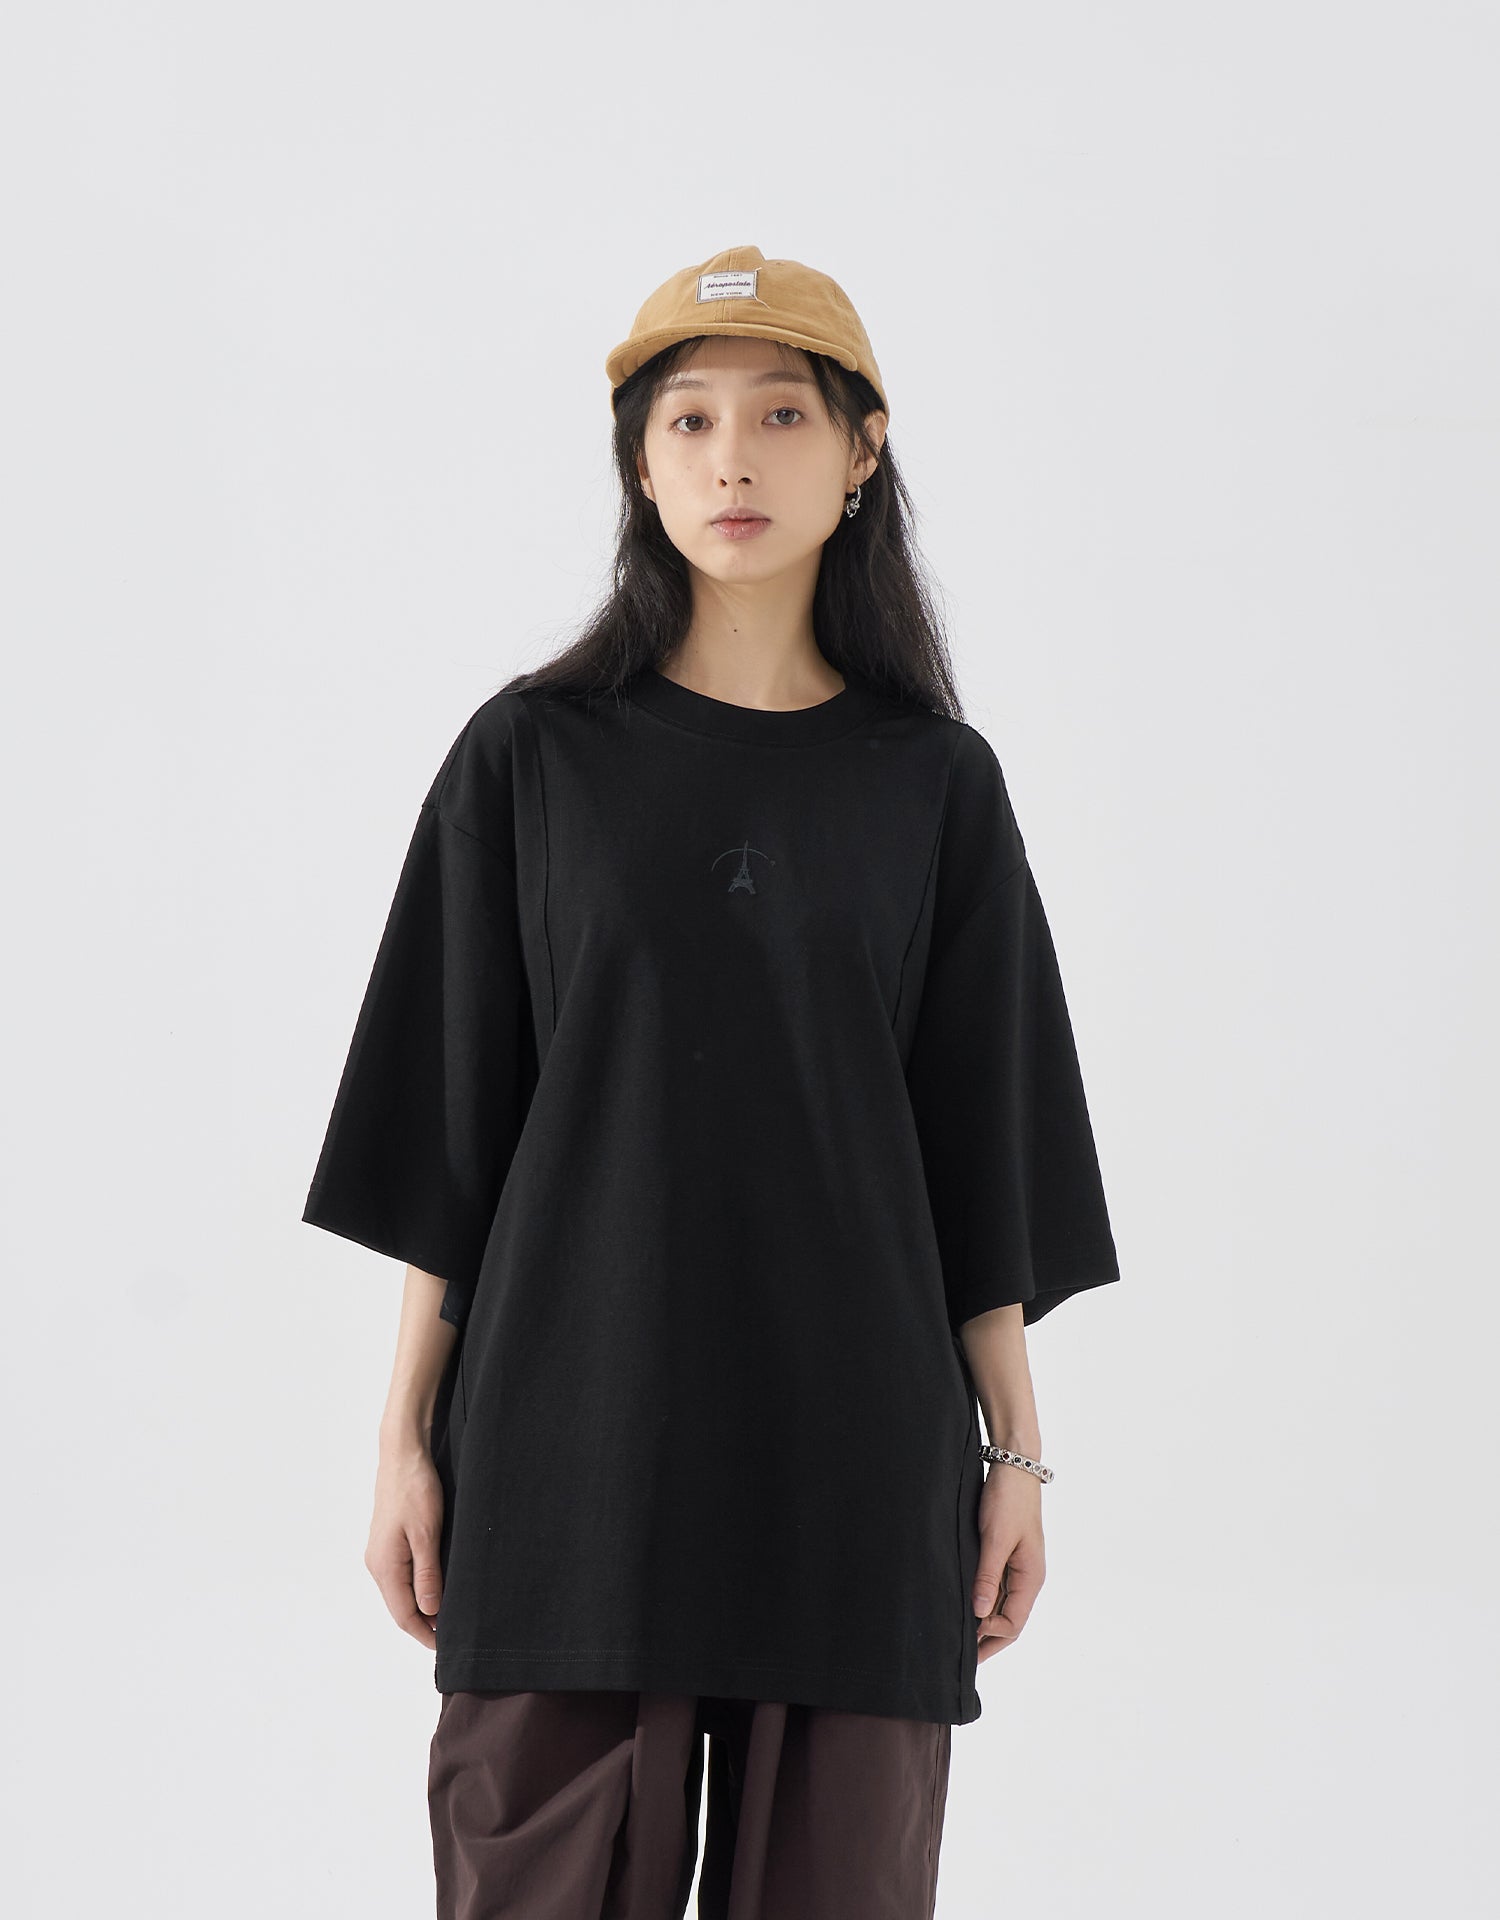 TopBasics Embroidered Tower T-Shirt